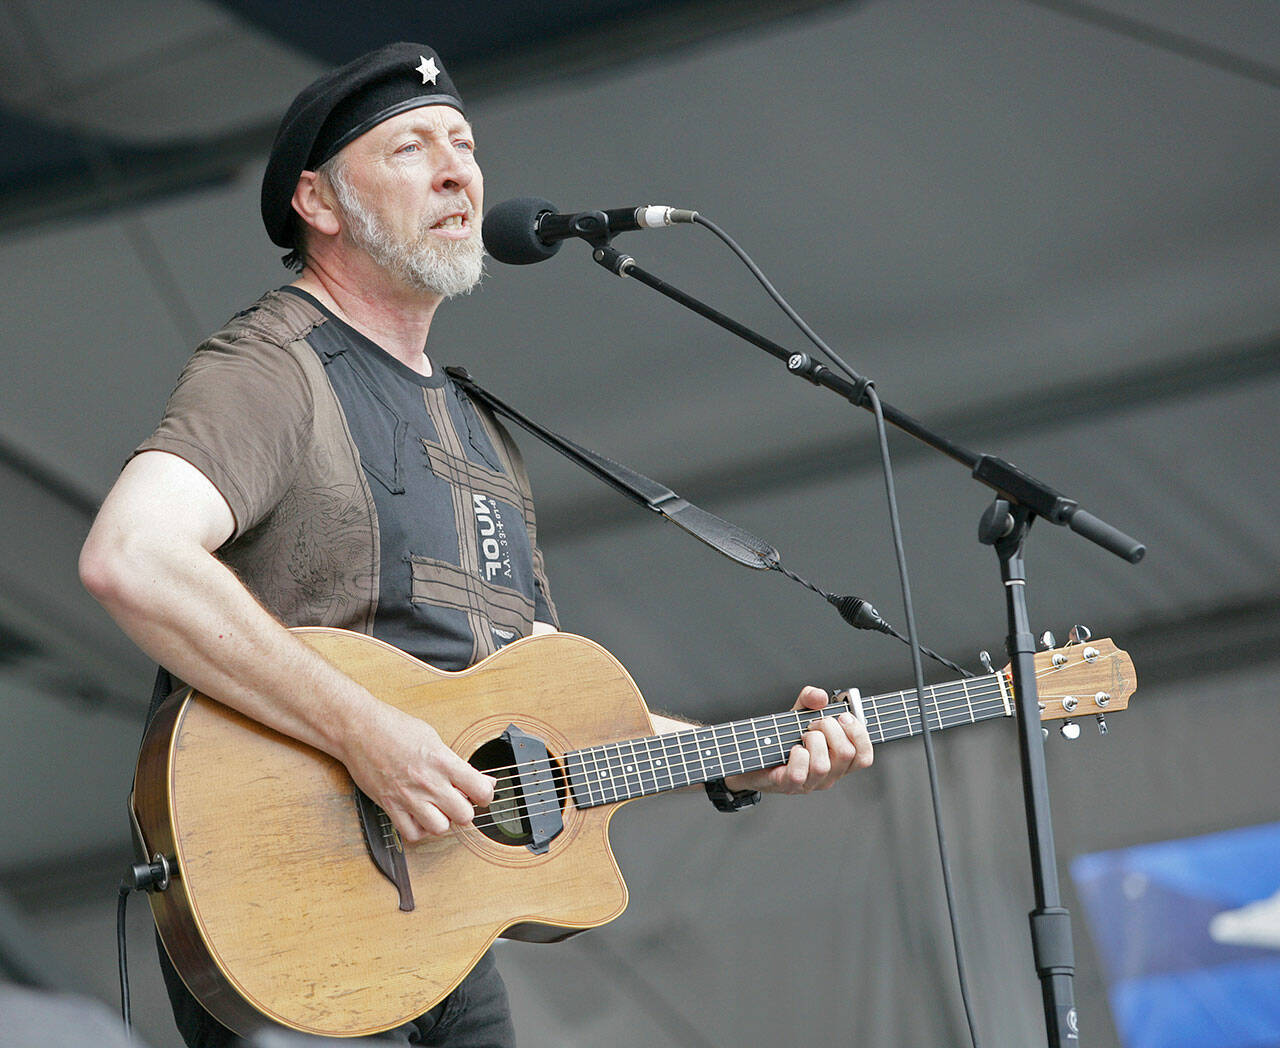 Richard Thompson is slated to perform an acoustic set Feb. 15 at the Edmonds Center for the Arts. (Associated Press file)